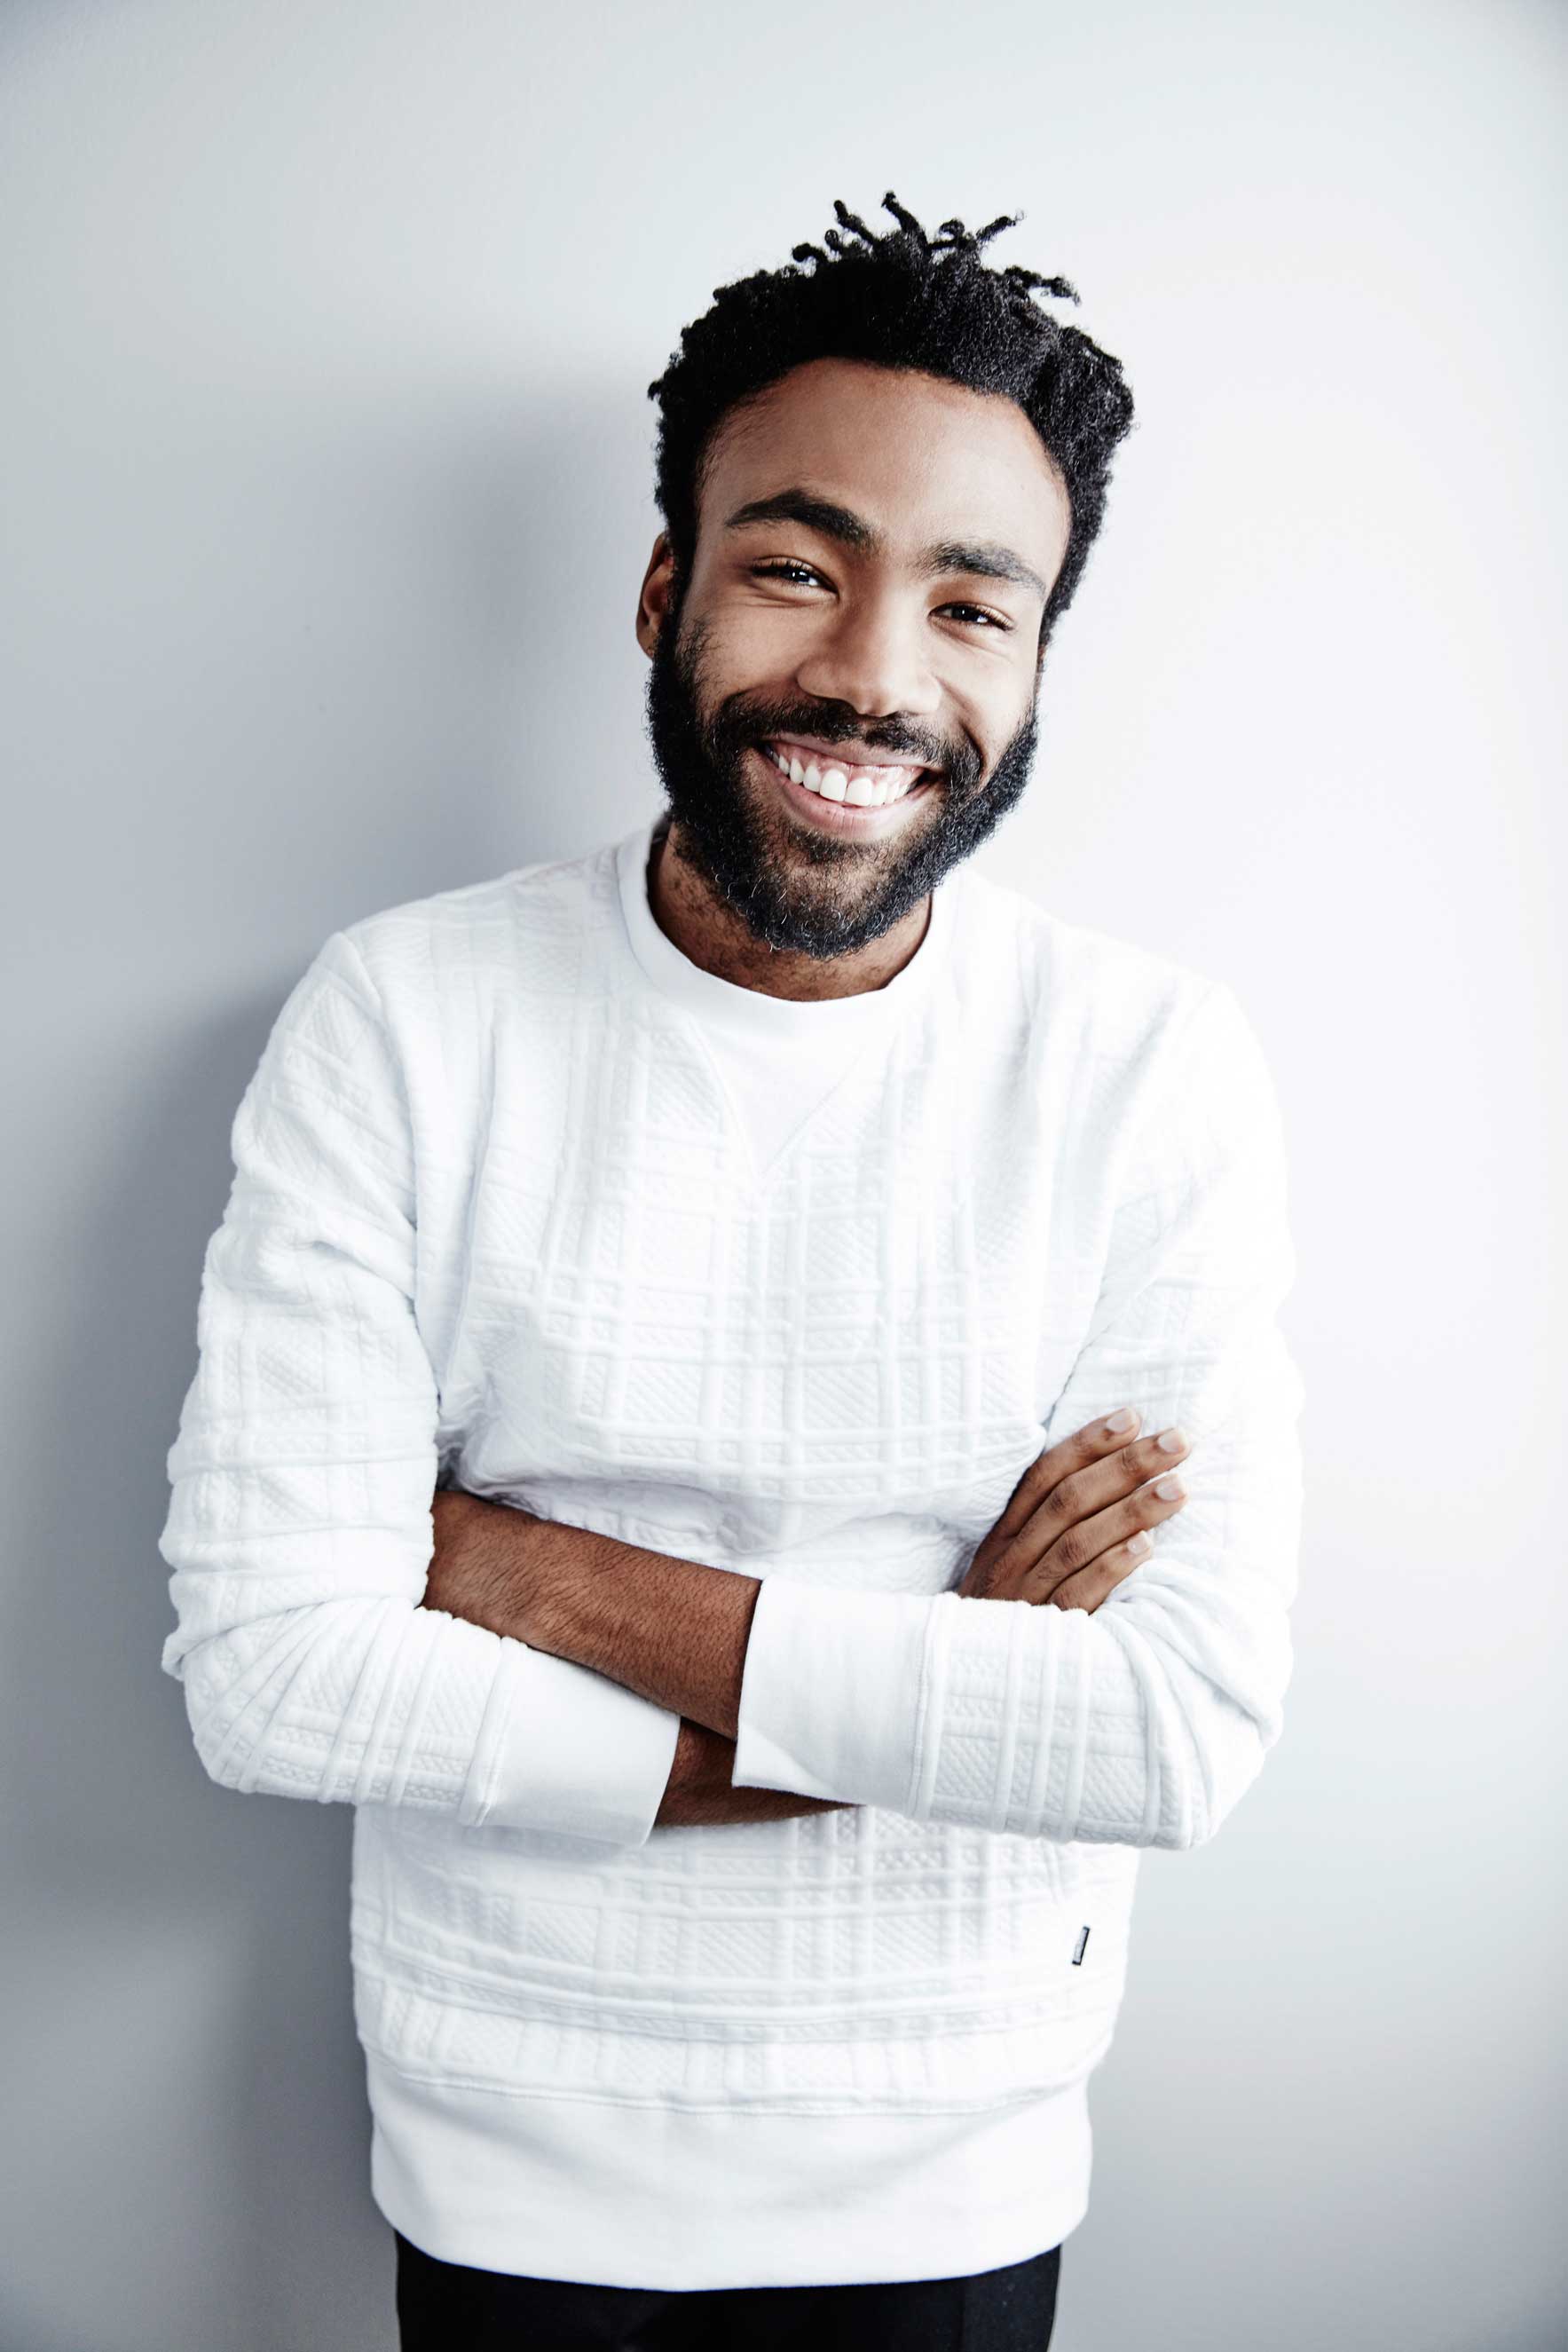 Donald Glover of "The Martian" poses for a portrait during the 2015 Toronto Film Festival on September 11, 2015 in Toronto, Ontario. (Maarten de Boer—Contour by Getty Images)